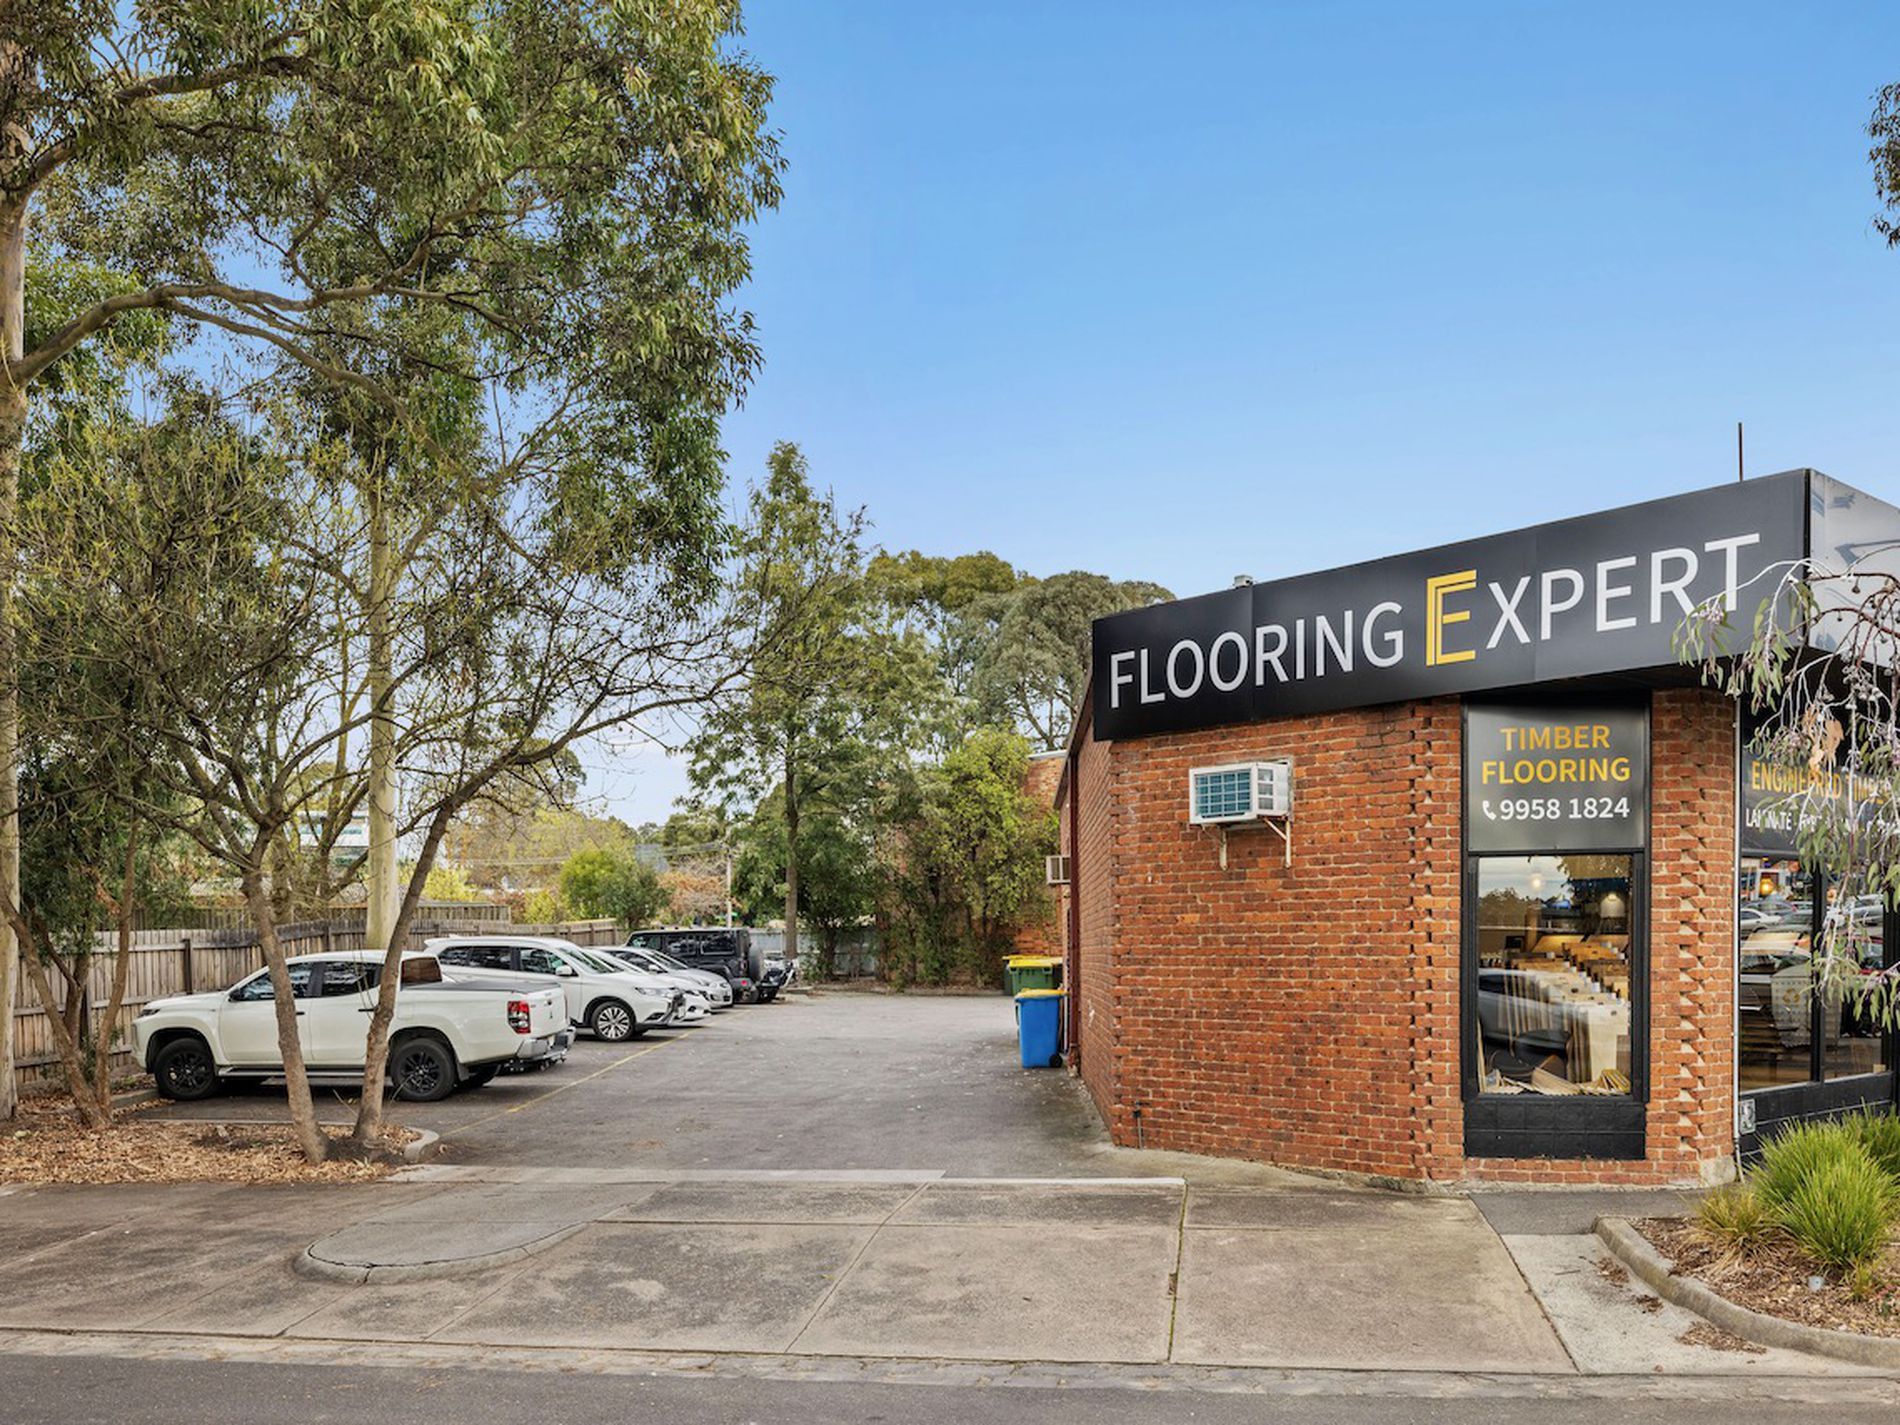 Floor Covering Retailer & Installation Business for Sale